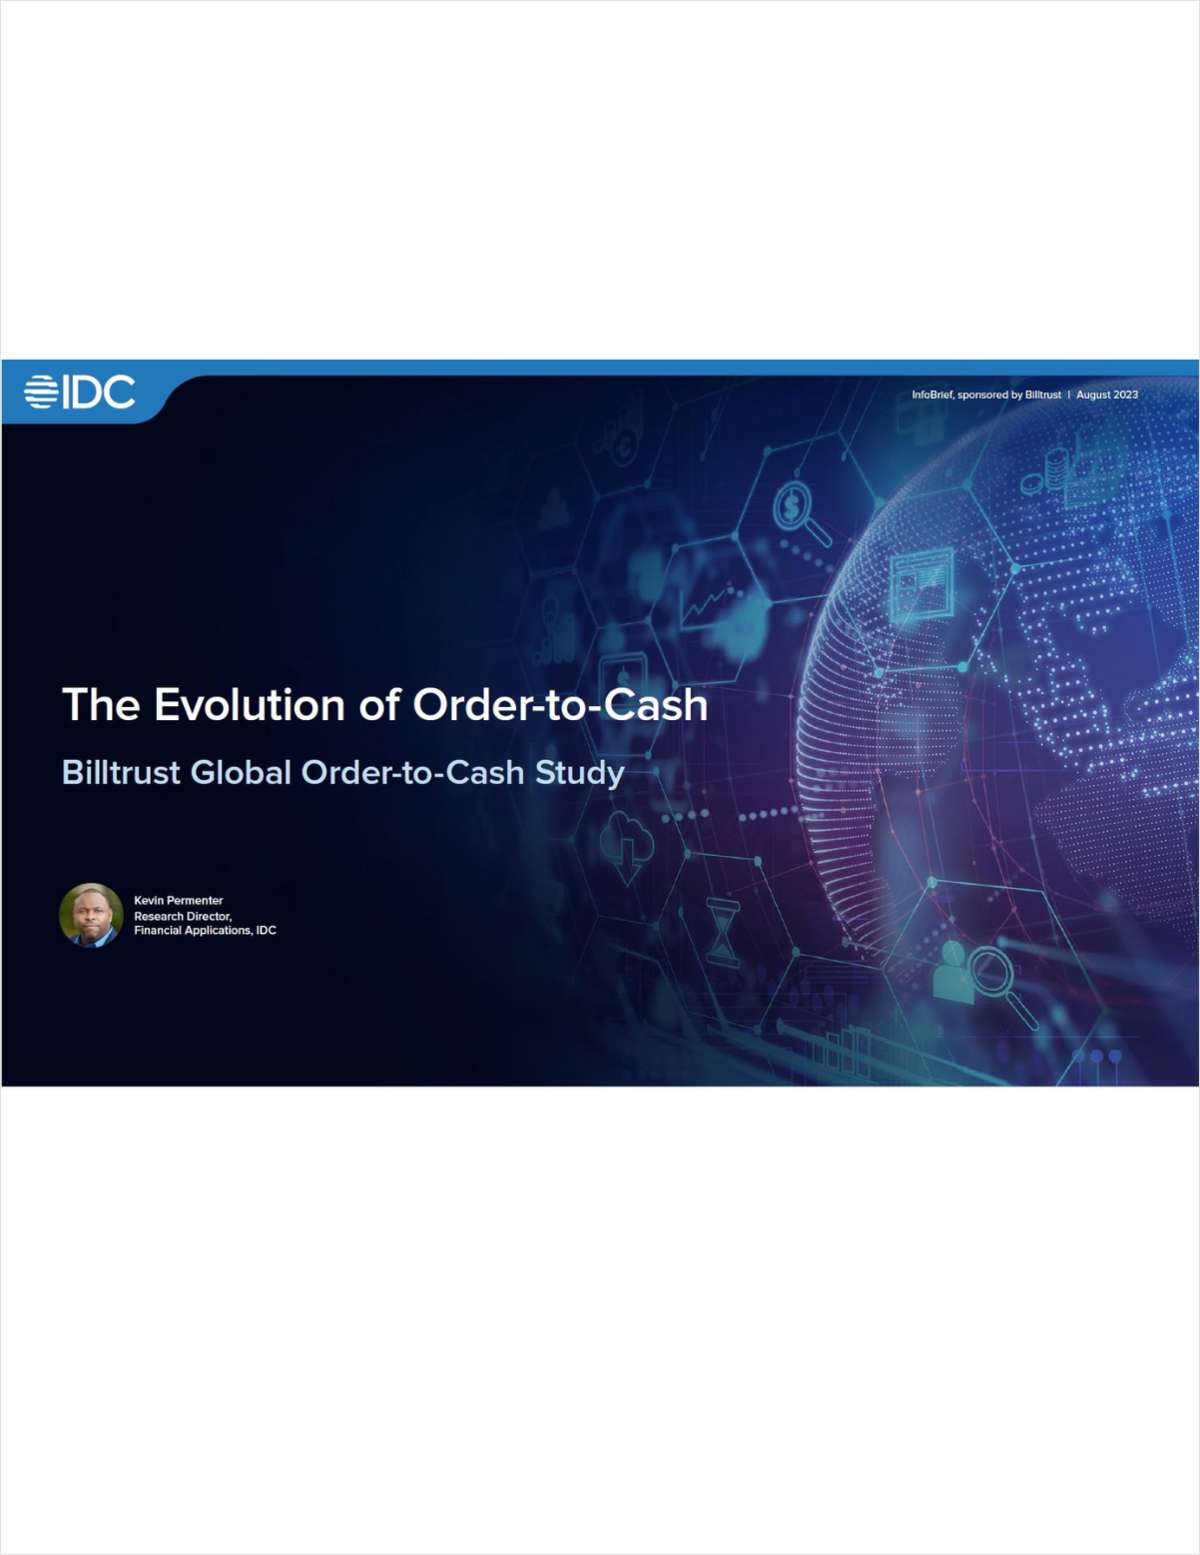 The Evolution of Order-to-Cash